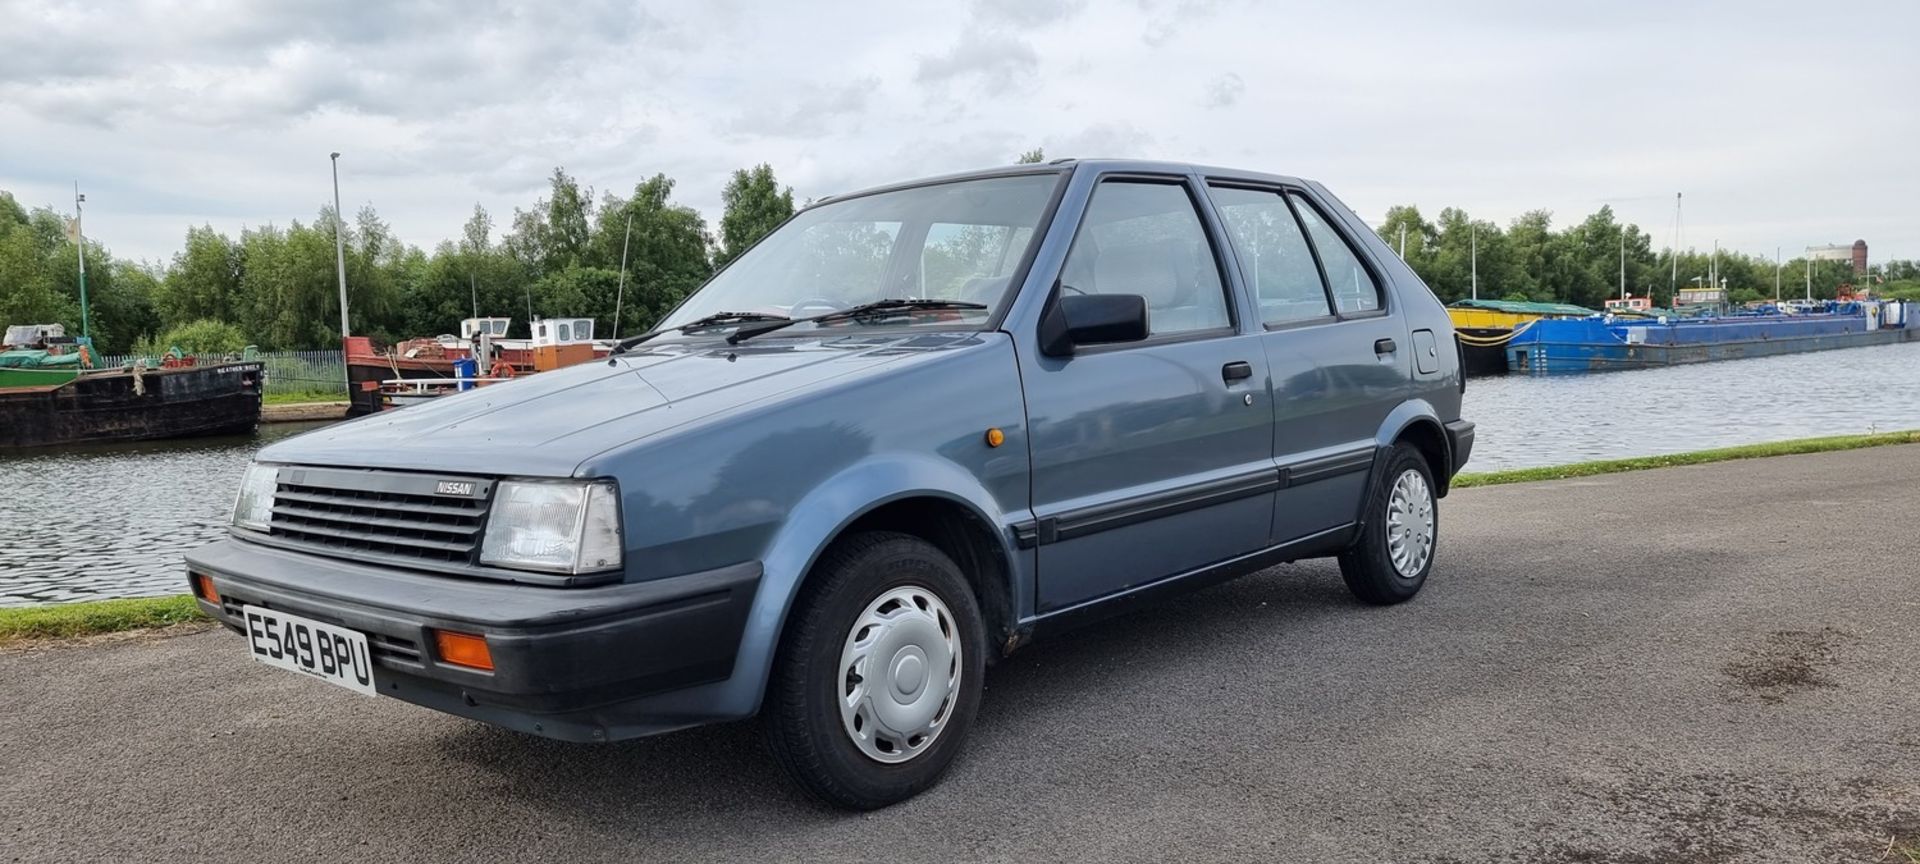 1987 Nissan Micra SGL automatic, 998cc. Registration number E549 BPU. Chassis number K10 429826. - Image 2 of 15